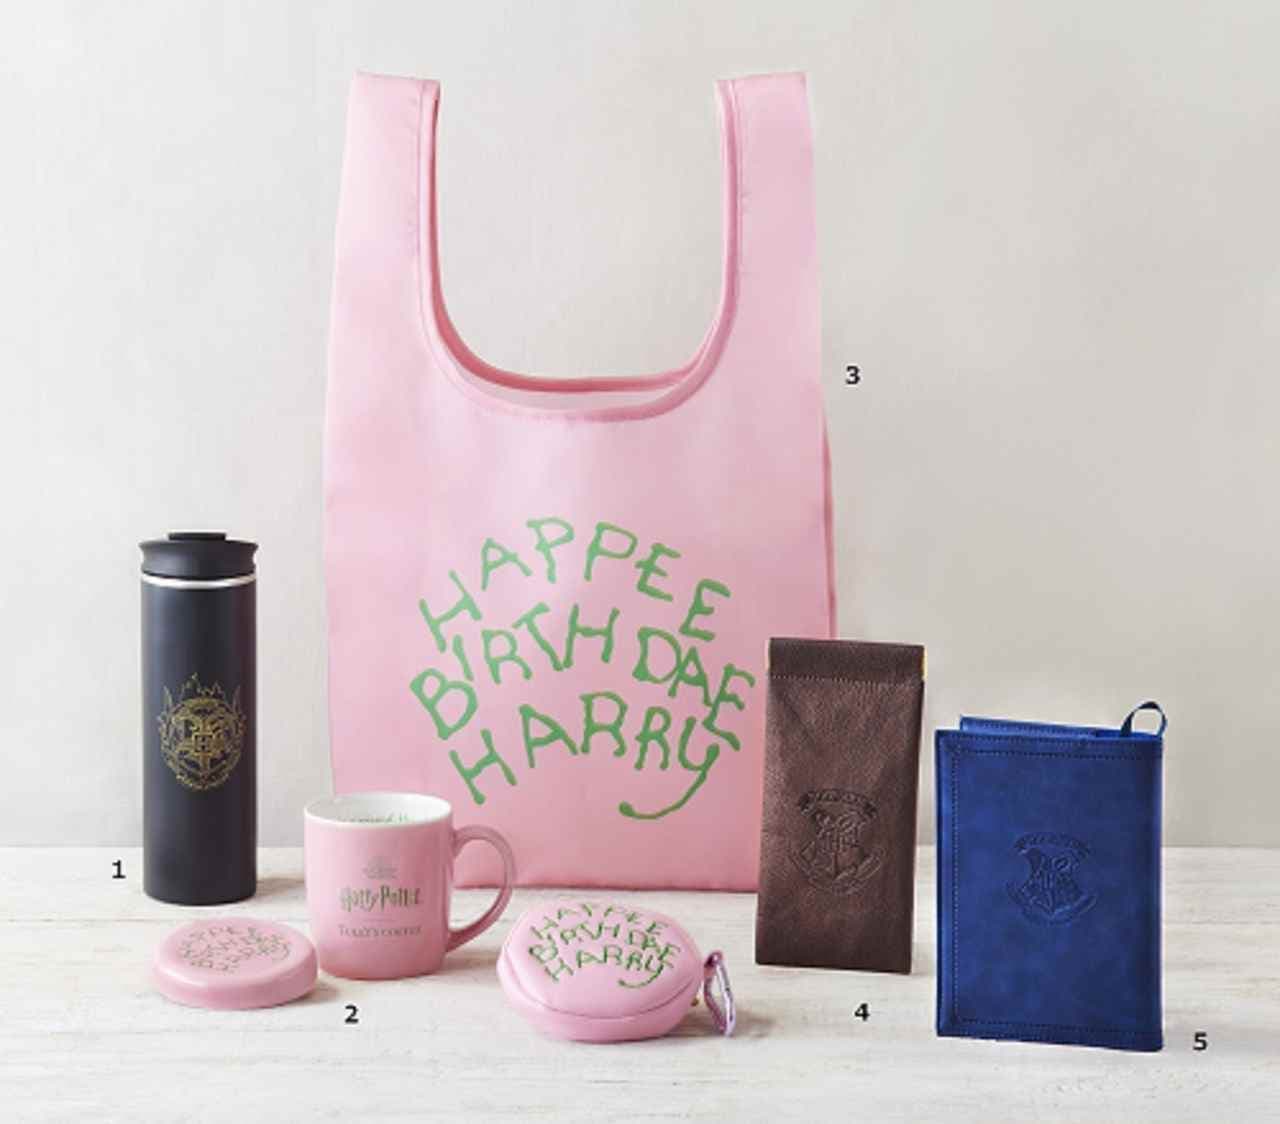 Tully's "Harry Potter" collaboration goods